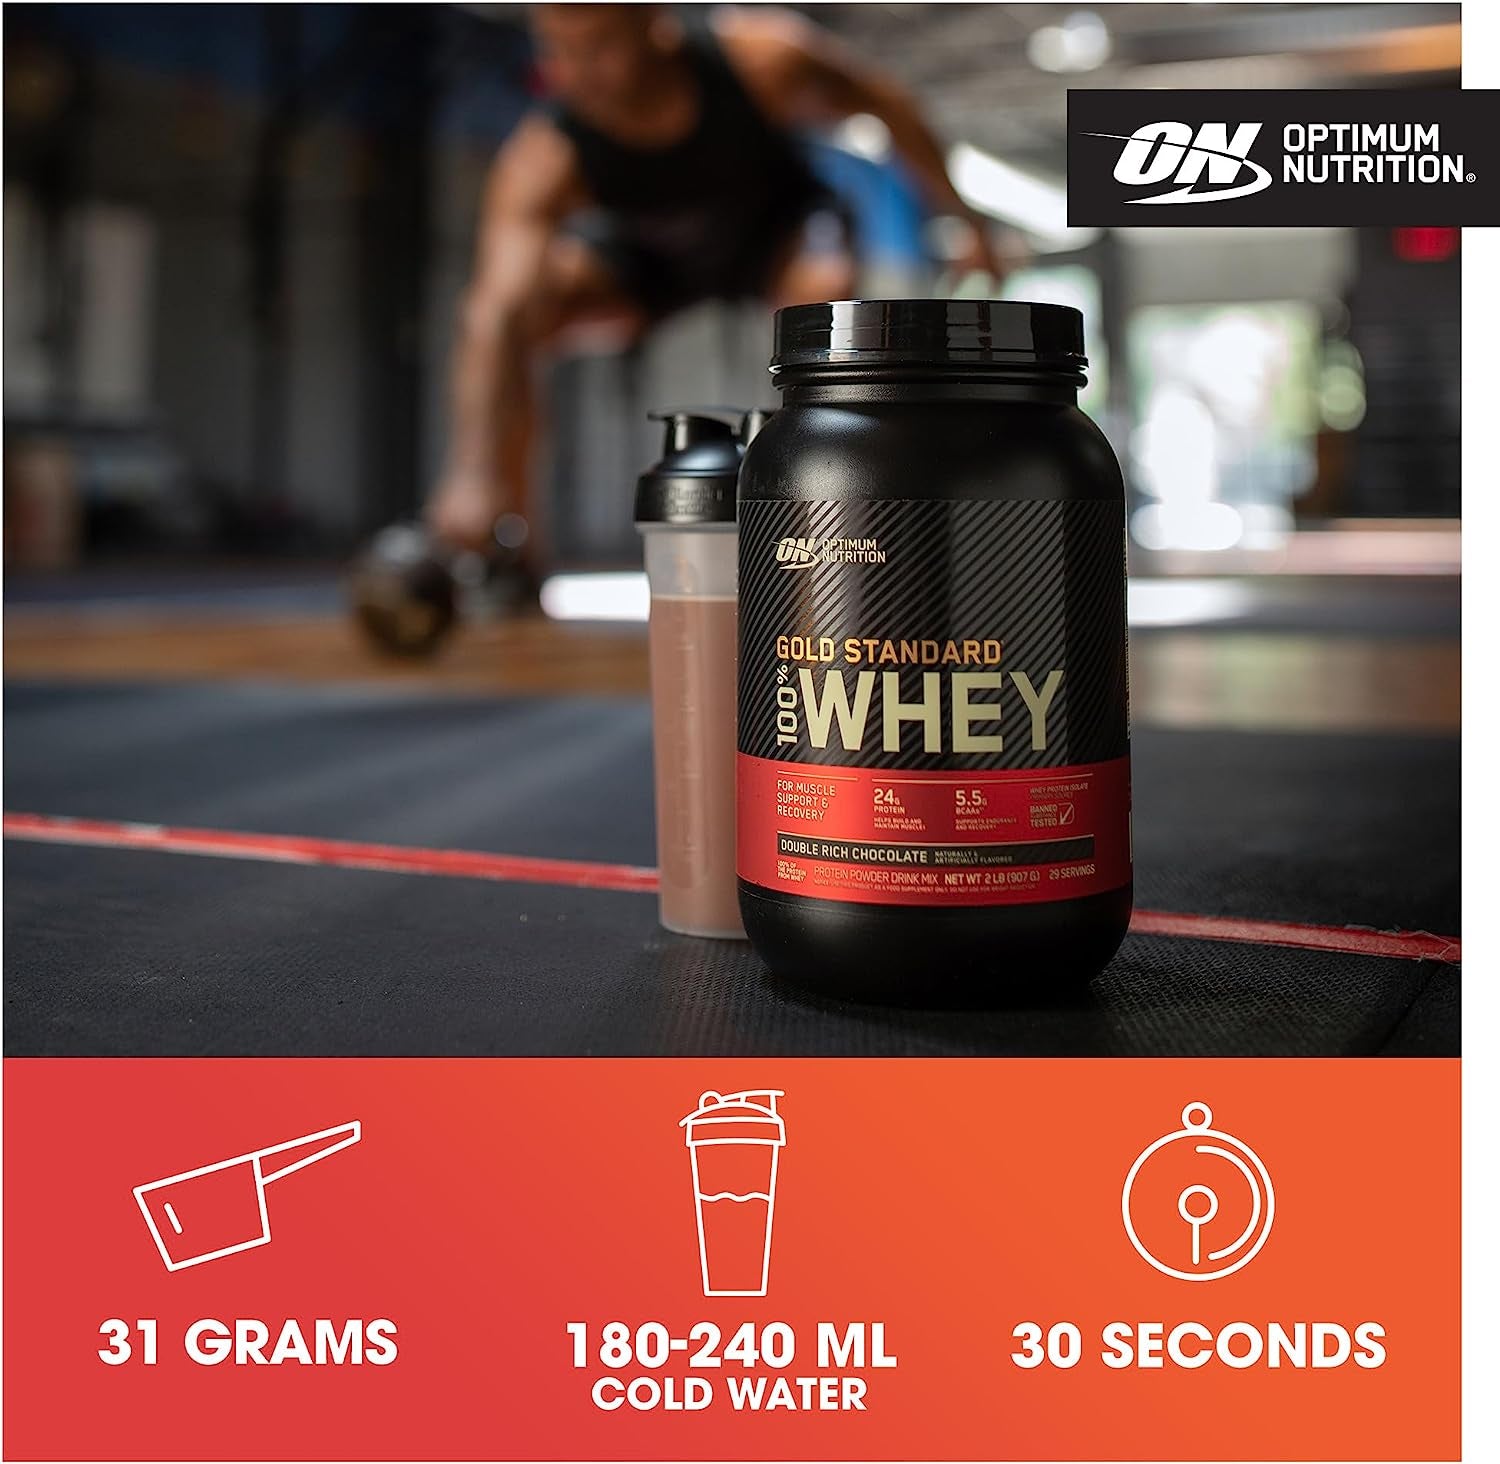 Gold Standard Whey Muscle Building and Recovery Protein Powder with Naturally Occurring Glutamine and Amino Acids, Extreme Milk Chocolate, 71 Servings, 2.27 Kg, Packaging May Vary